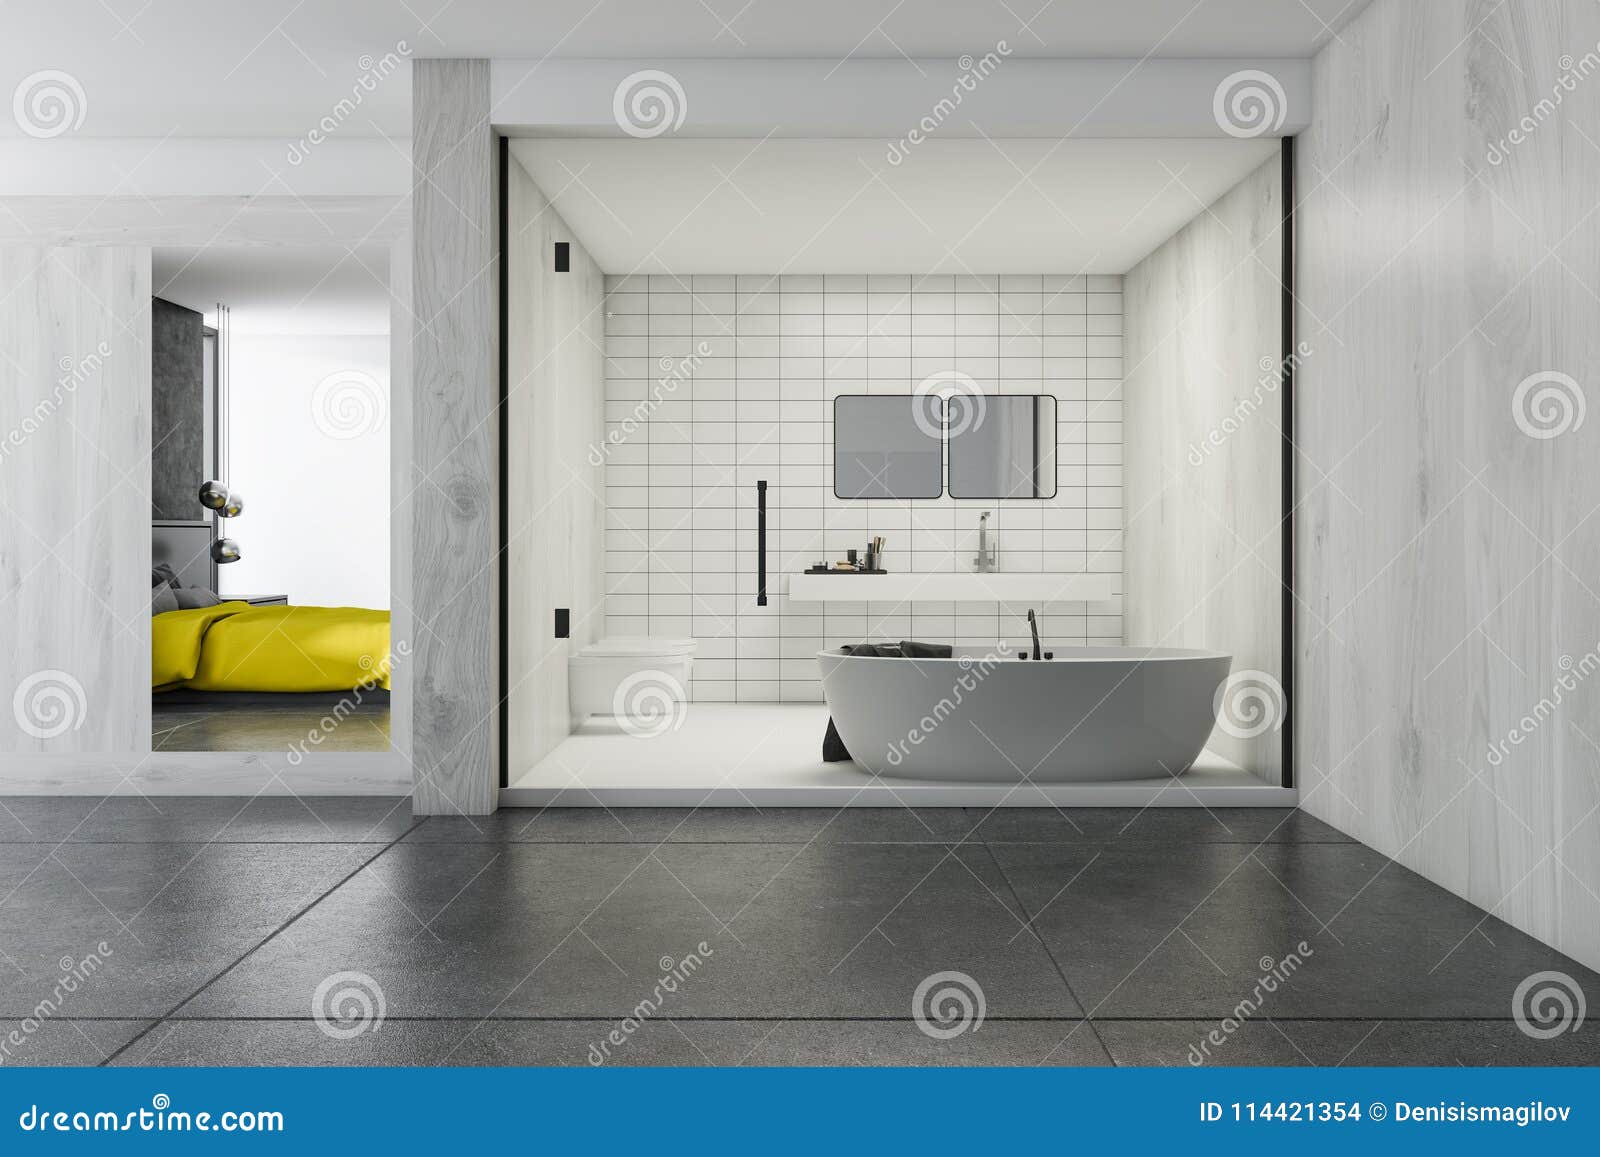 Tiled Bathroom And A Bedroom Stock Illustration